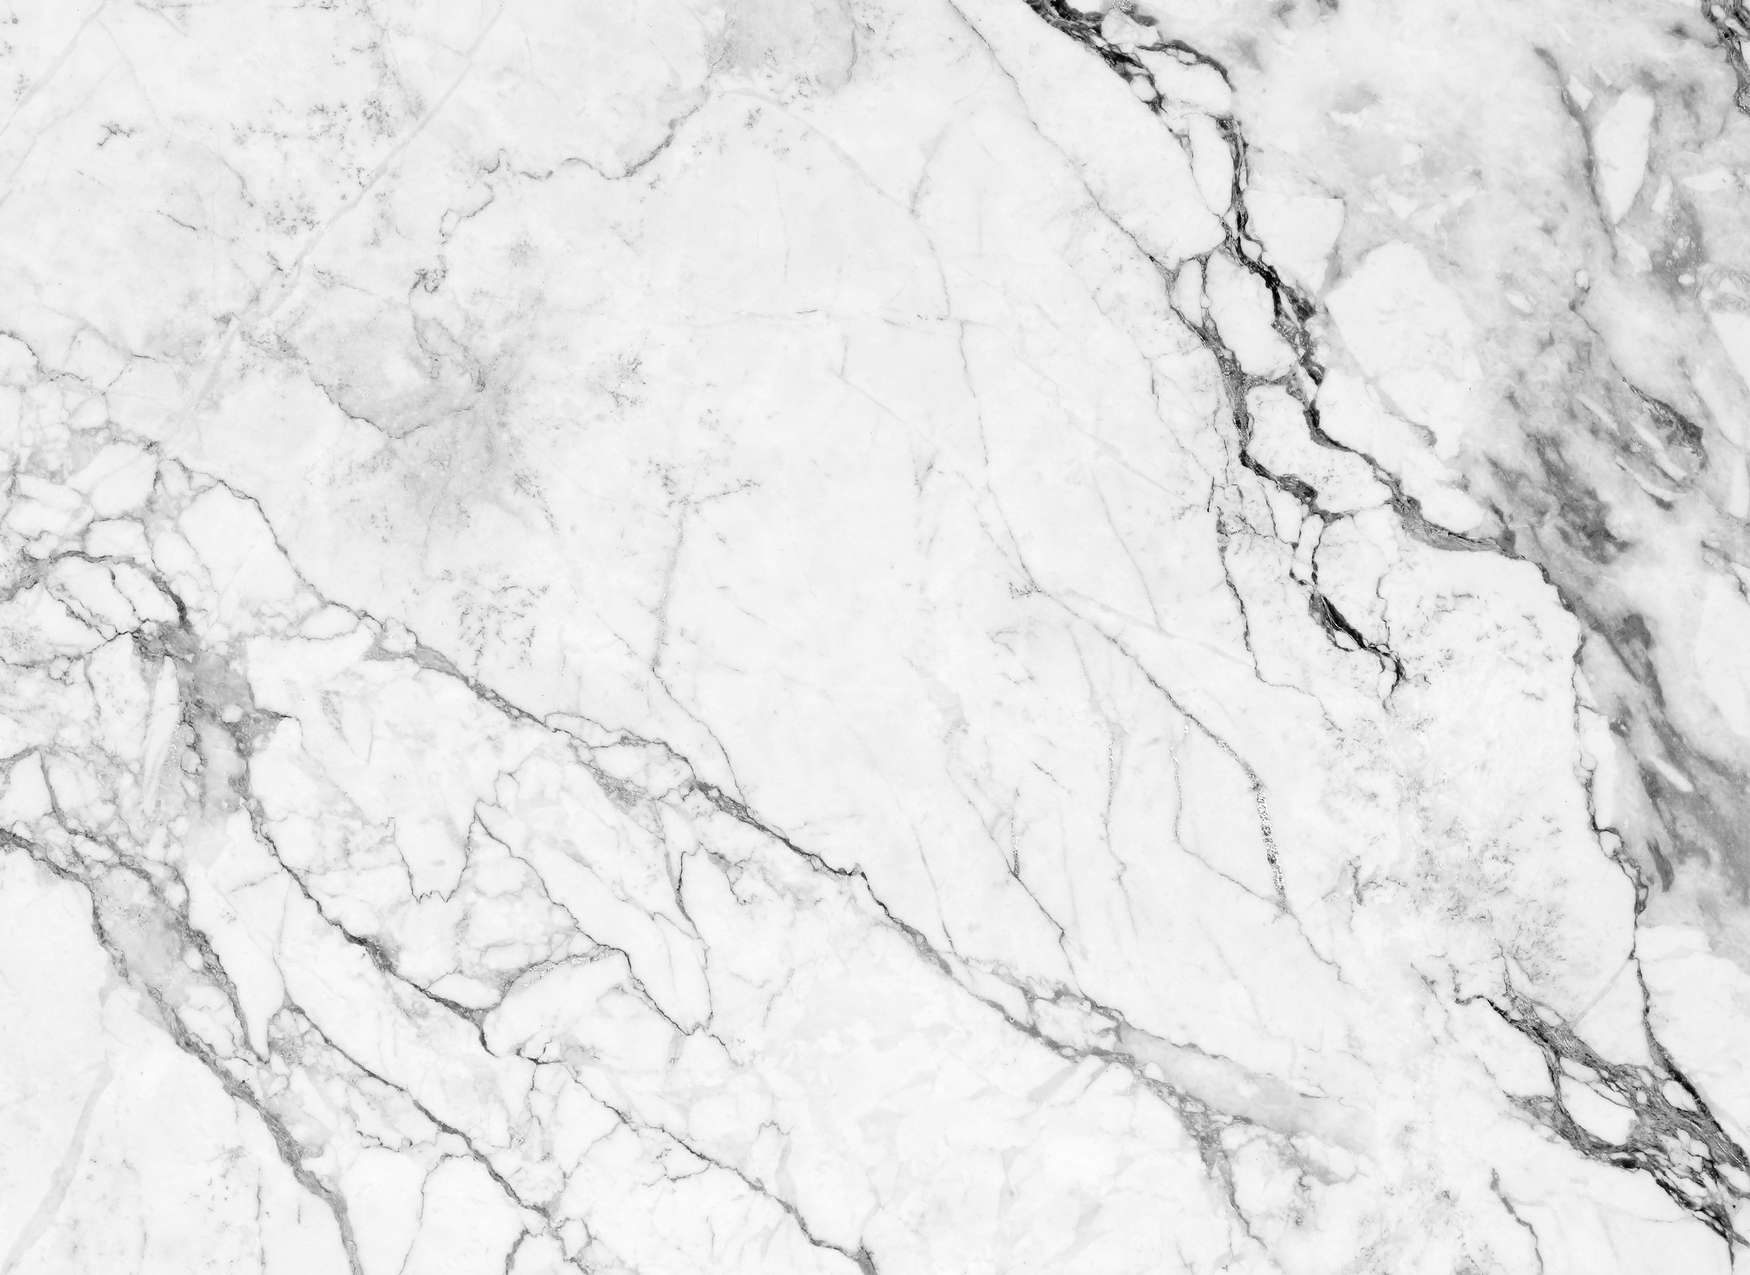             Photo wallpaper with modern marble look - grey, white
        